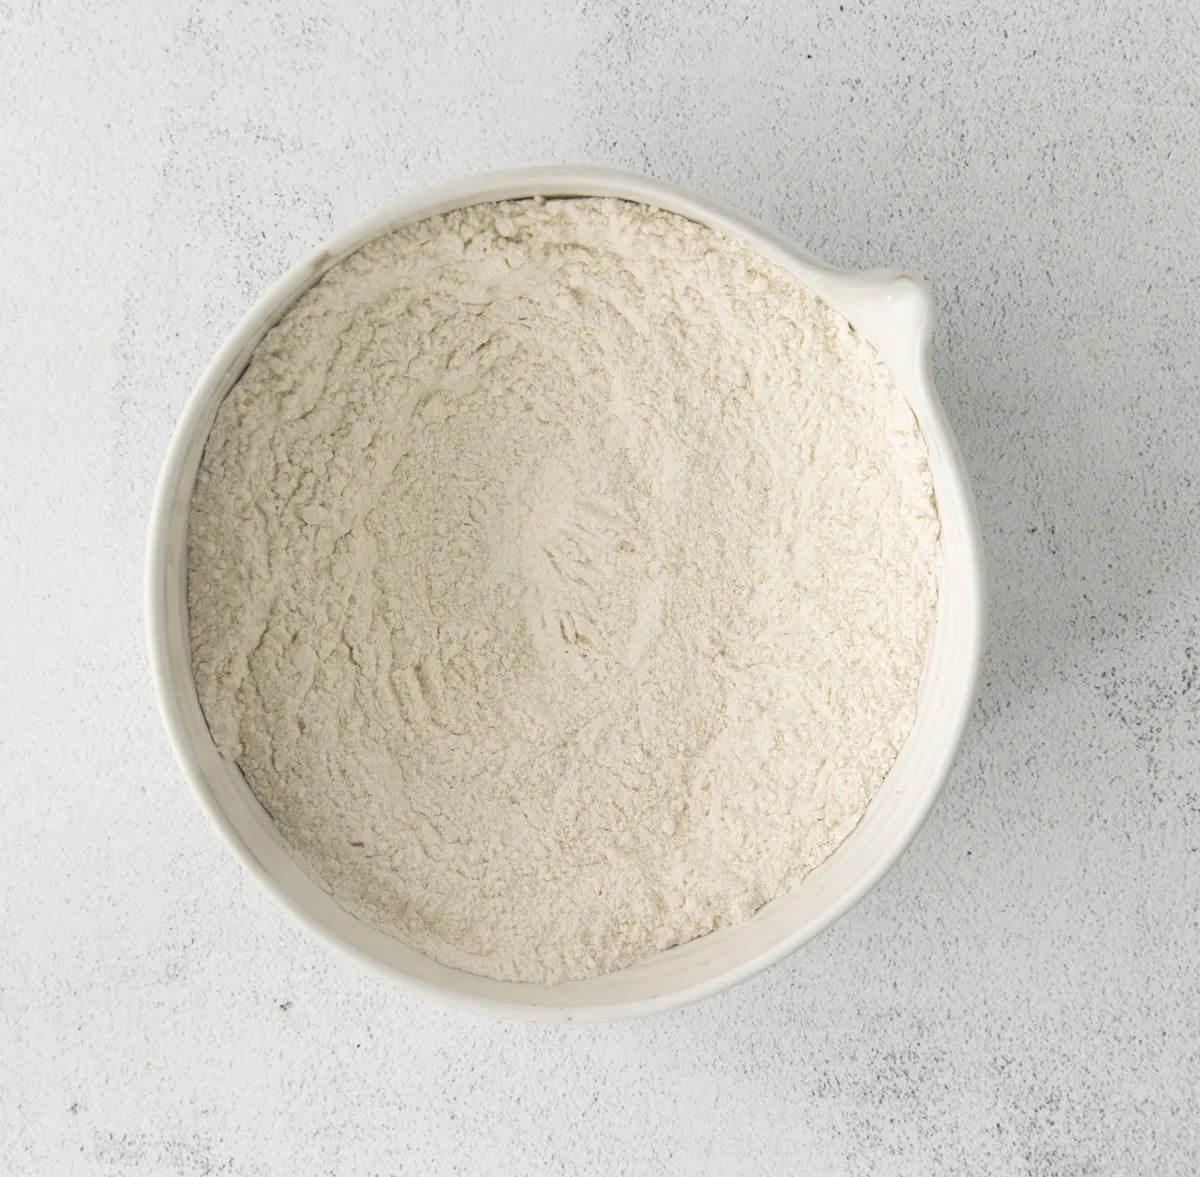 Flour, sugar, and baking powder whisked together in a bowl